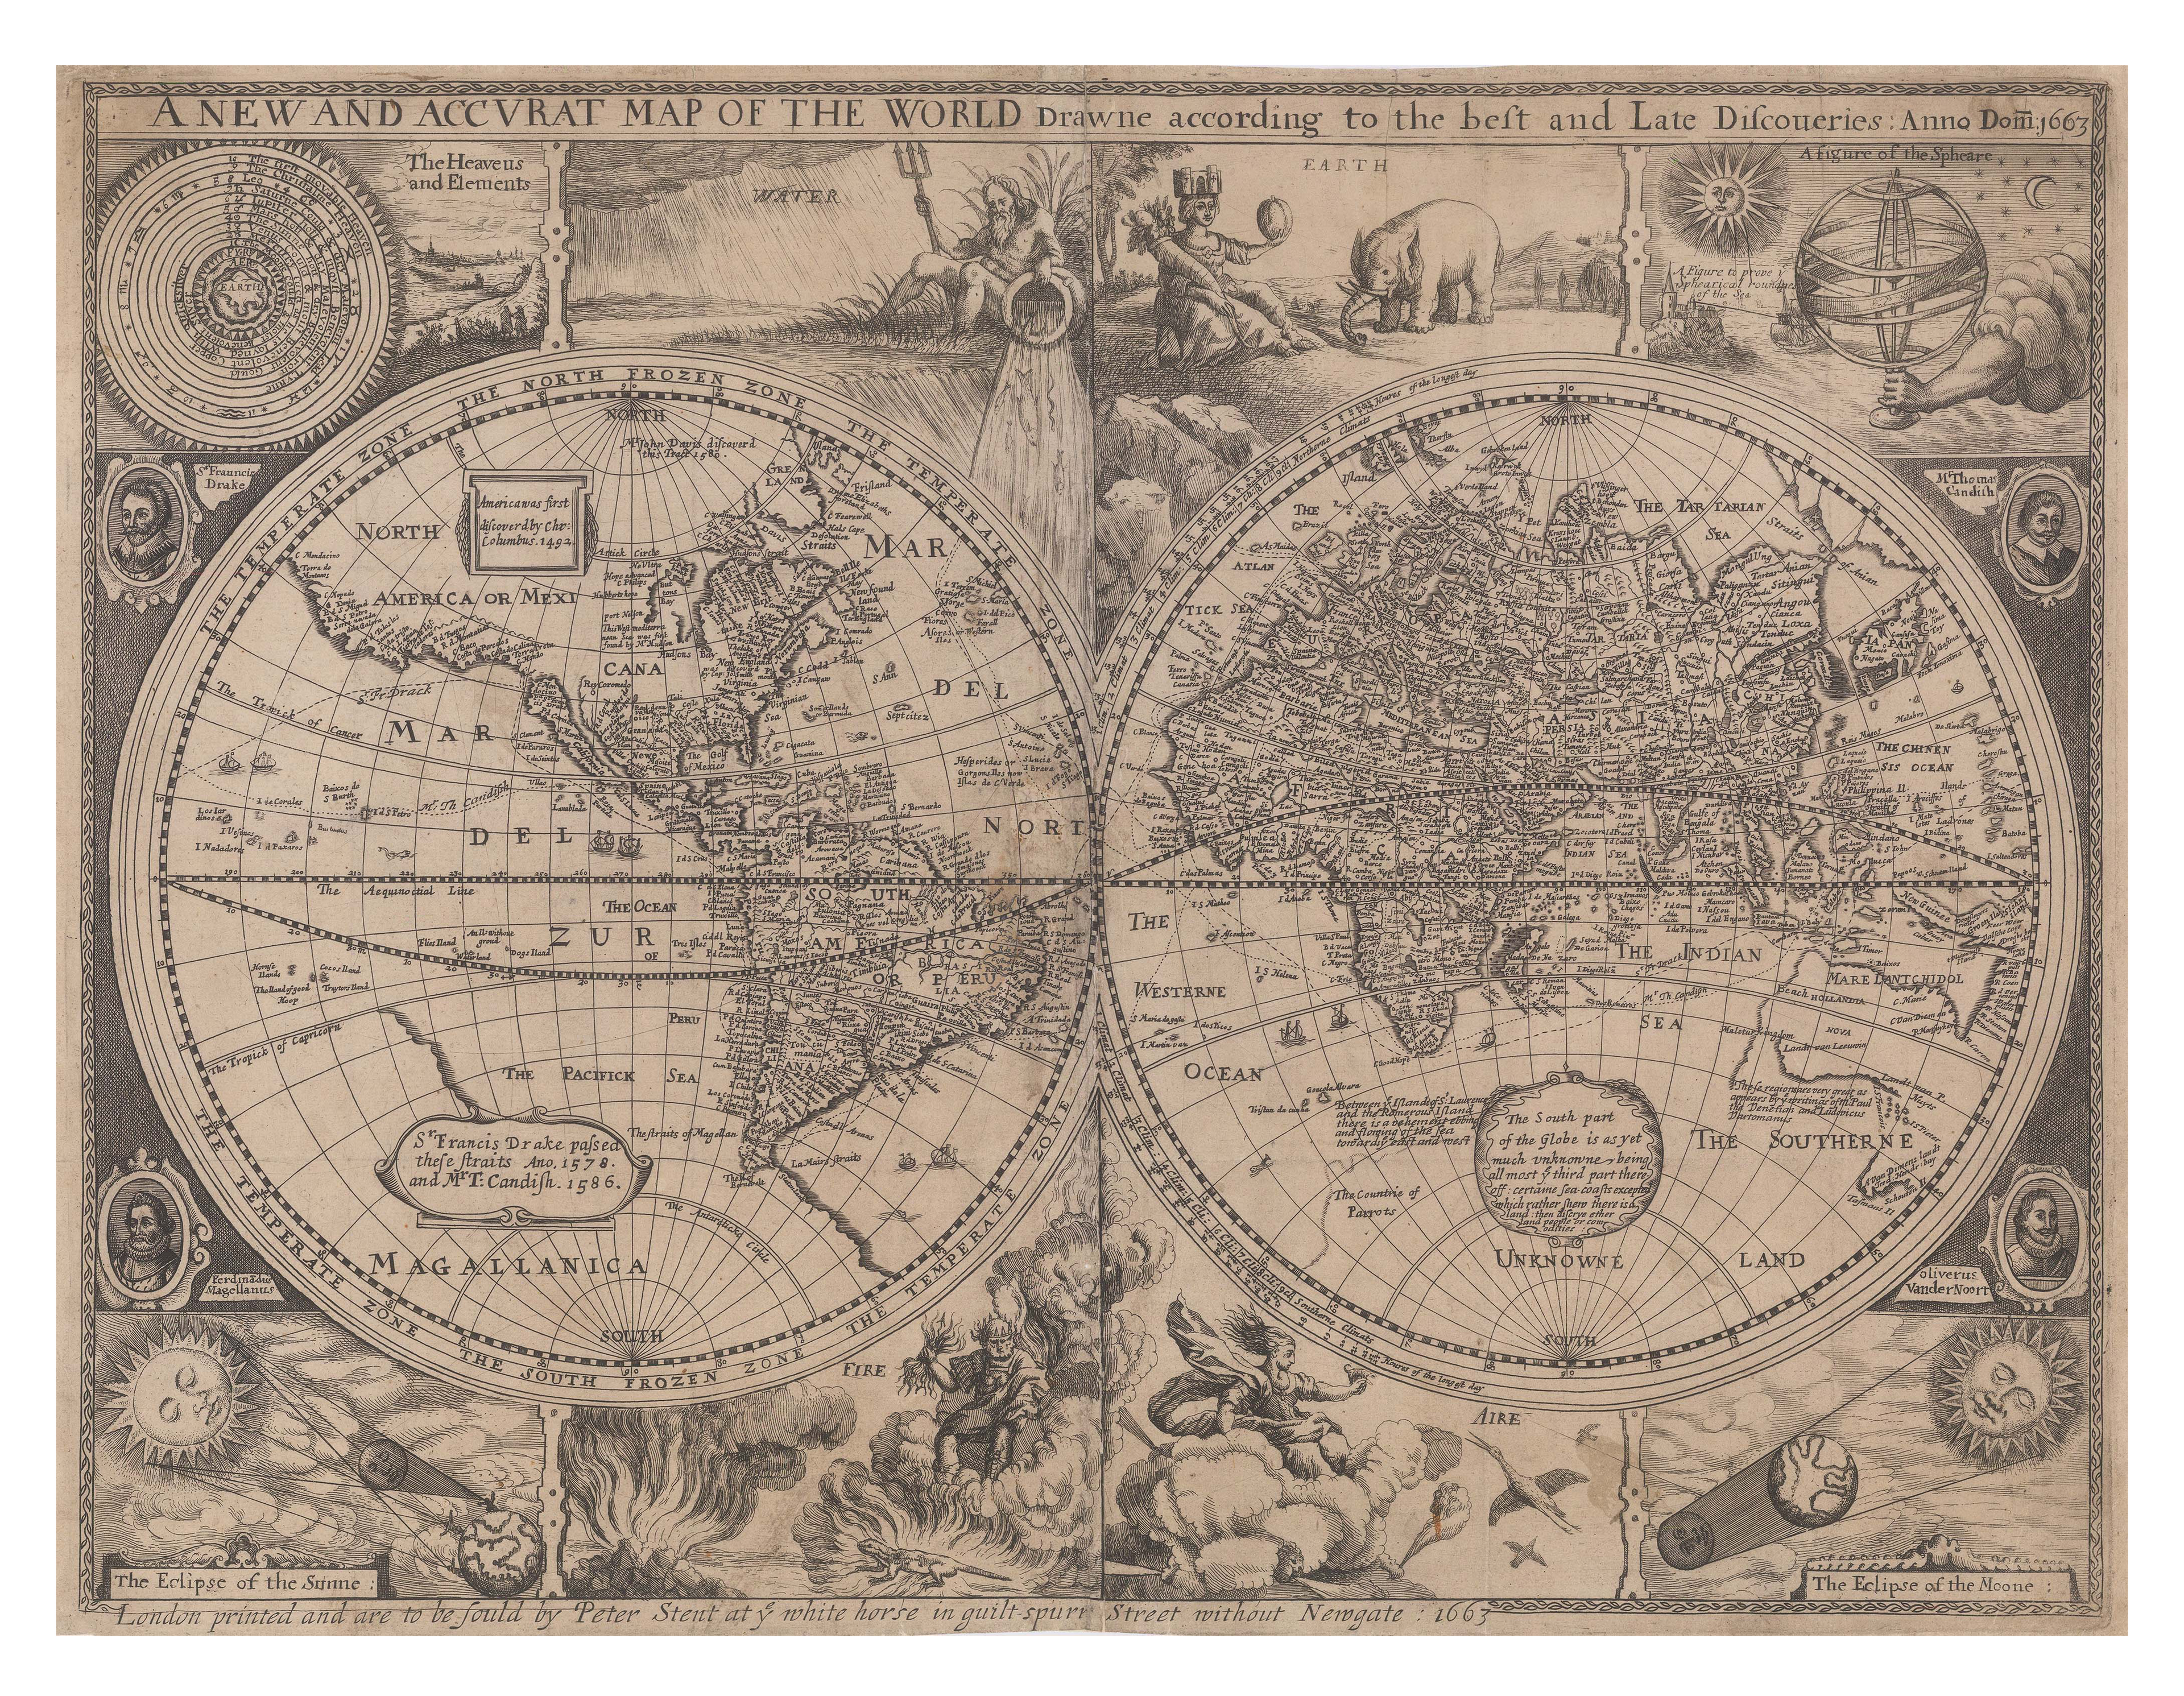 An example of the Mercator projection and also a hemisphere projection in one map. This is a black and white map by Stent, based on an earlier work by Speed, showing the whole world in the East and West Hemispheres. Around the edges of the map are cosmological illustrations, in addition to illustrations of the four elements.